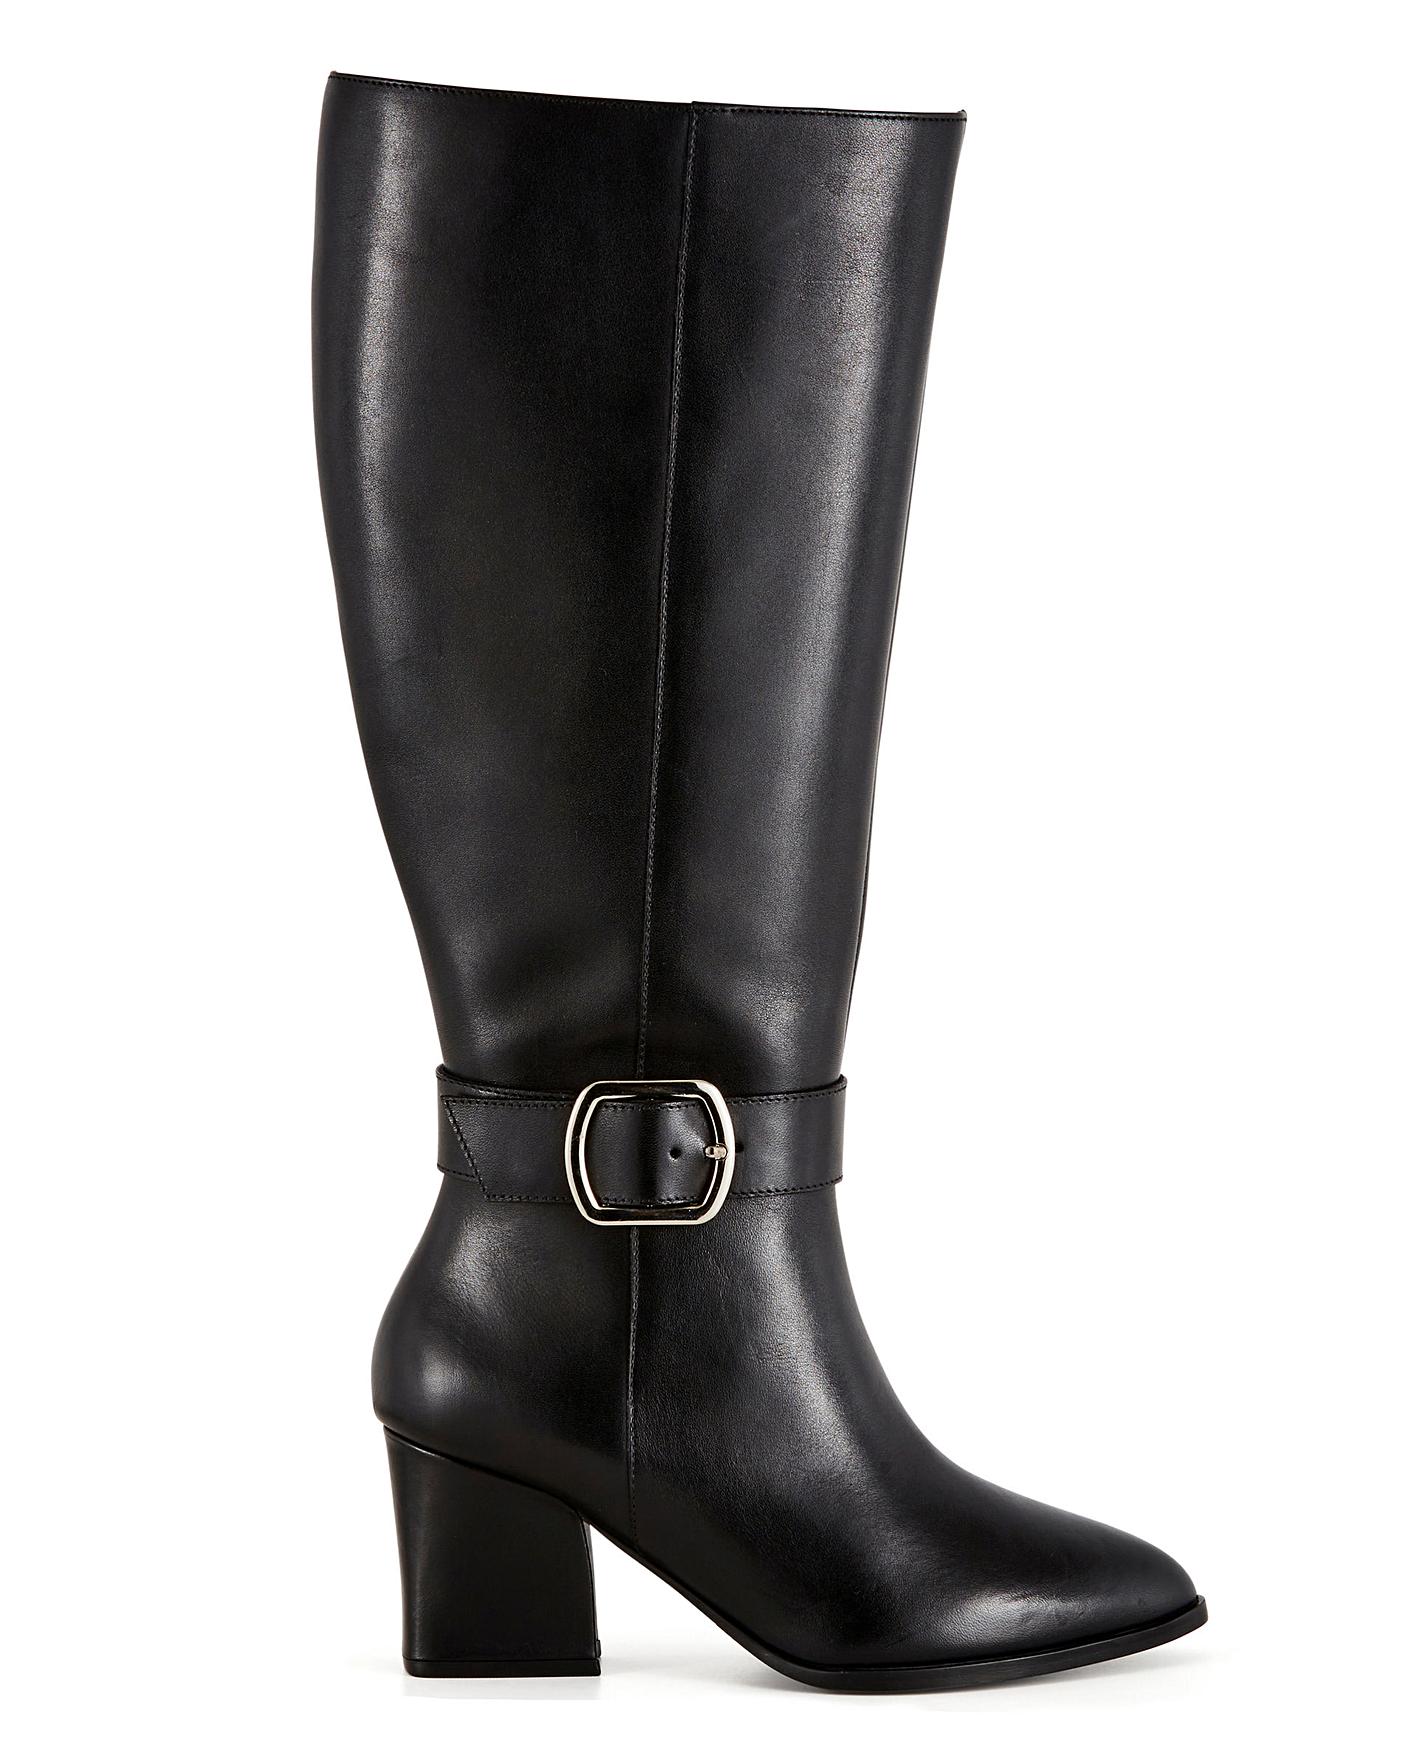 Leather Buckle Boots EEE Fit Curvy Calf | Simply Be